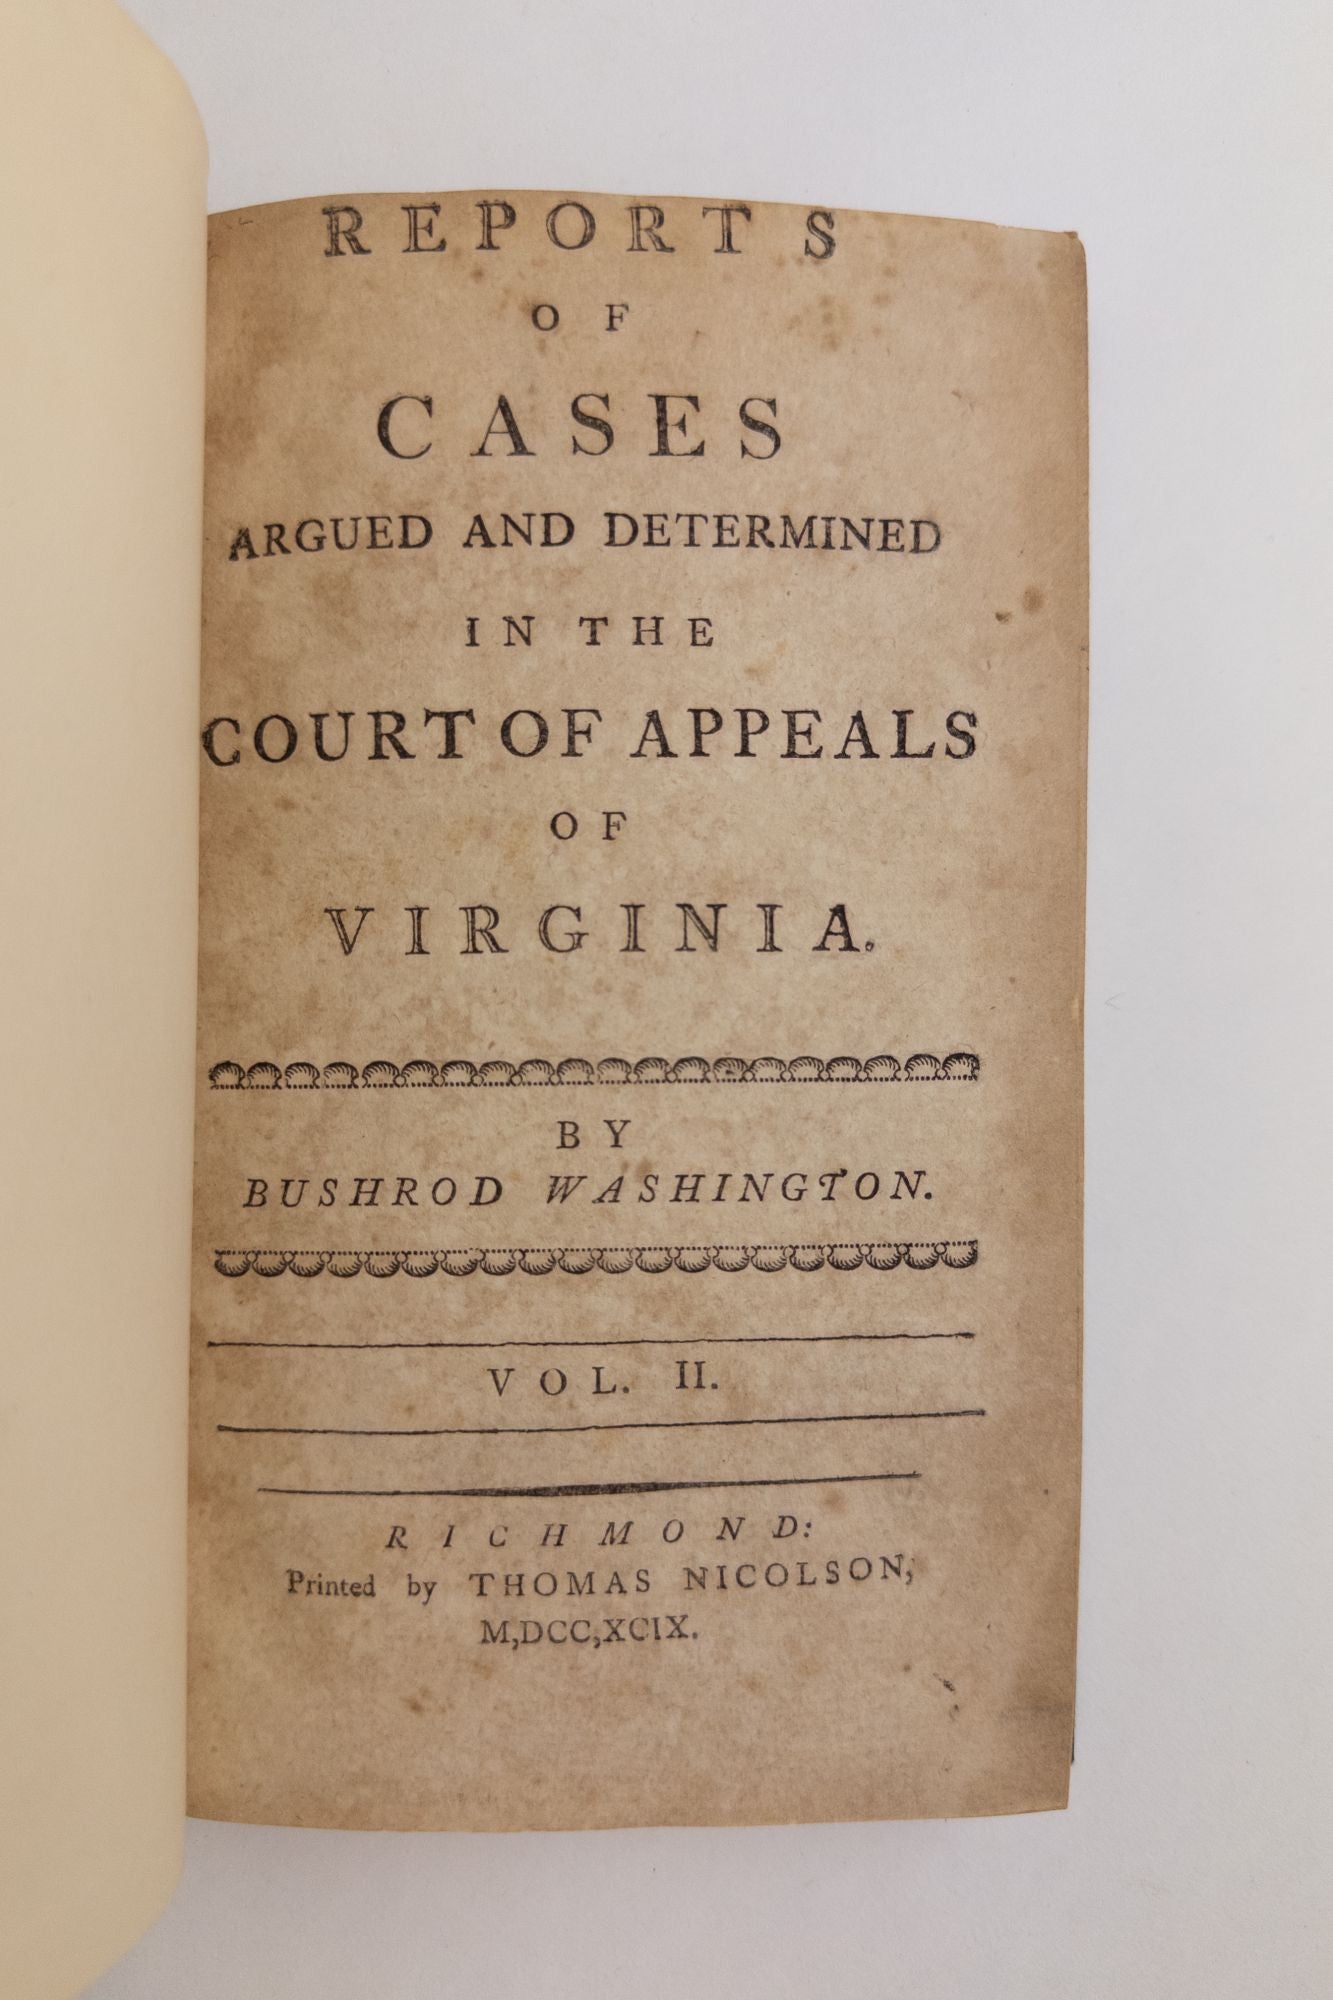 Product Image for Reports of Cases Argued and Determined in the Court of Appeals of Virginia [Two Volumes]